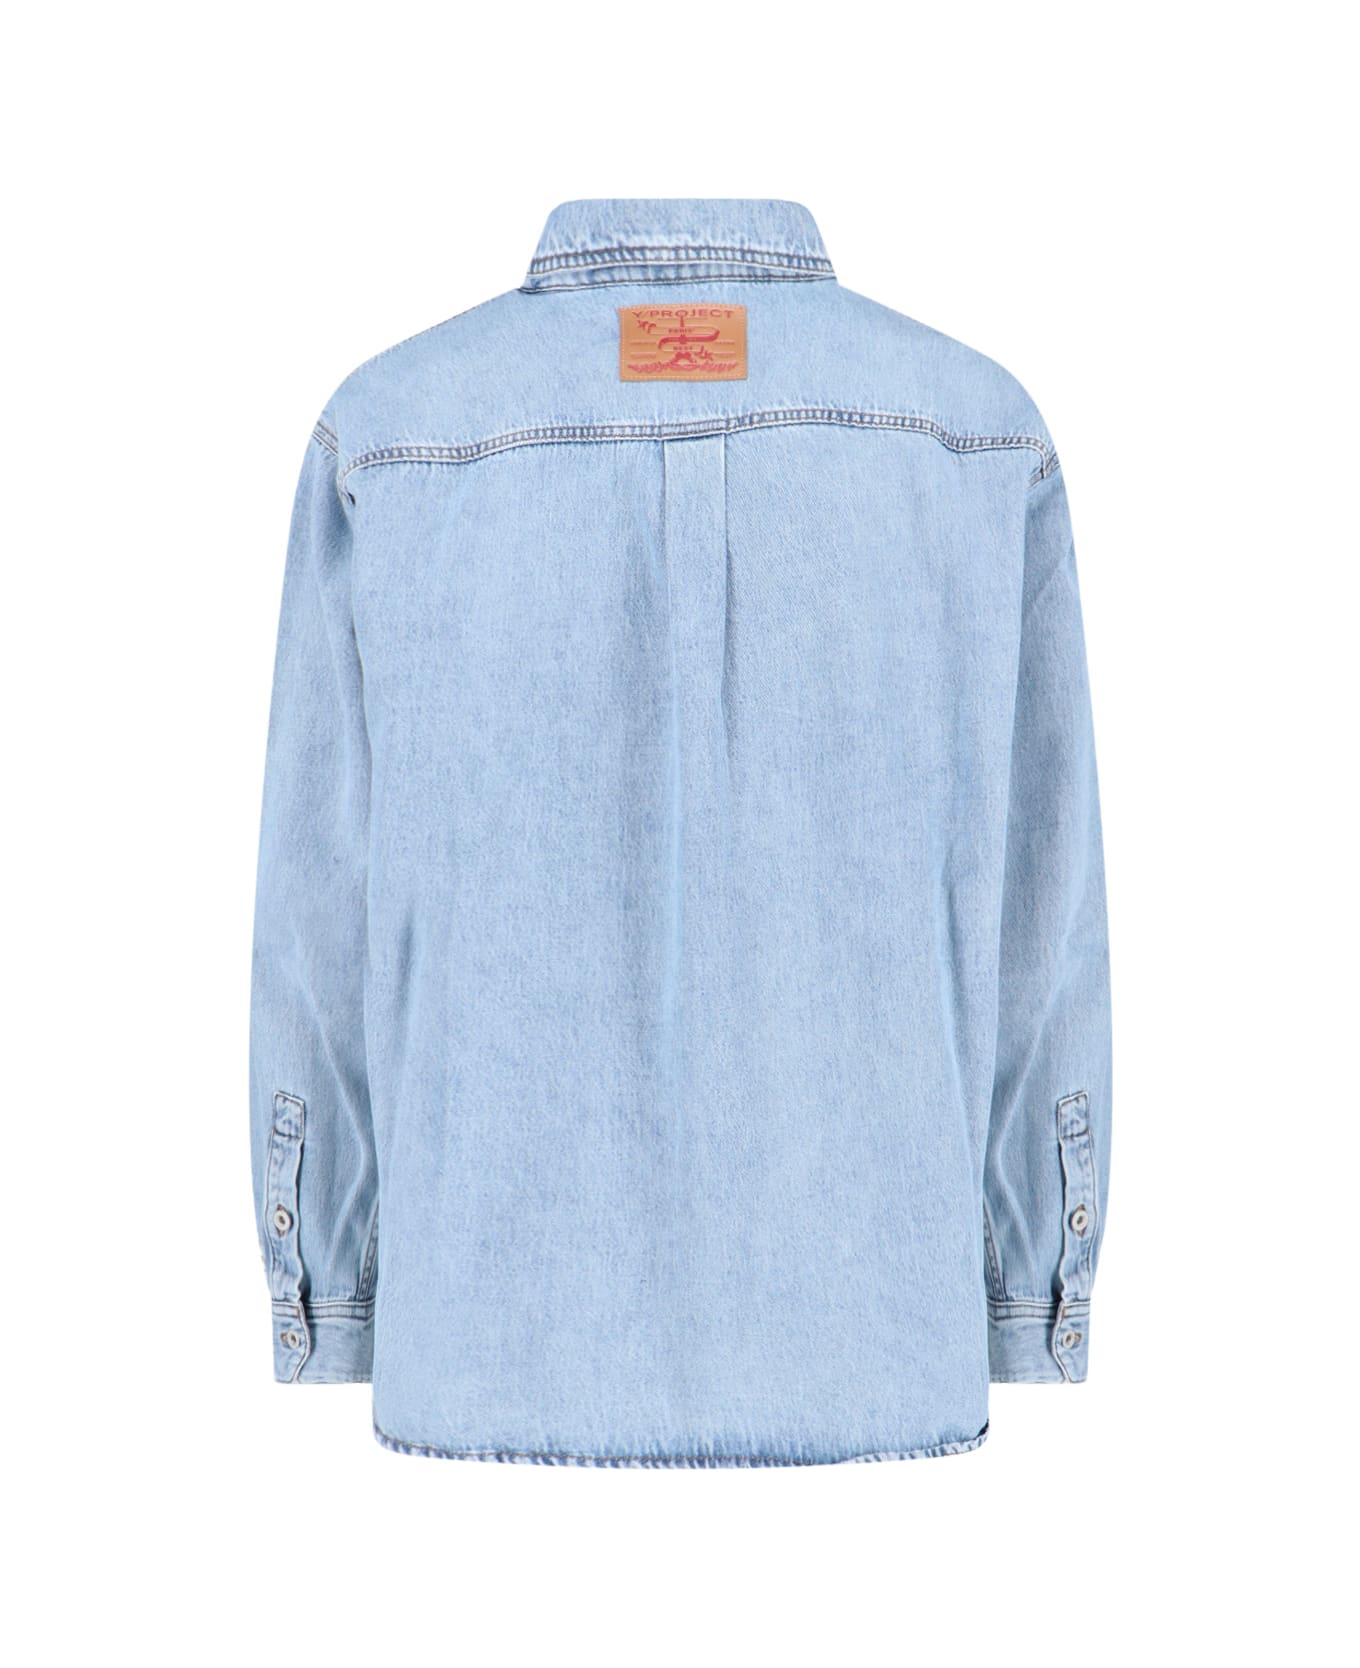 Y/Project 'hook And Eye' Shirt Jacket - Light Blue